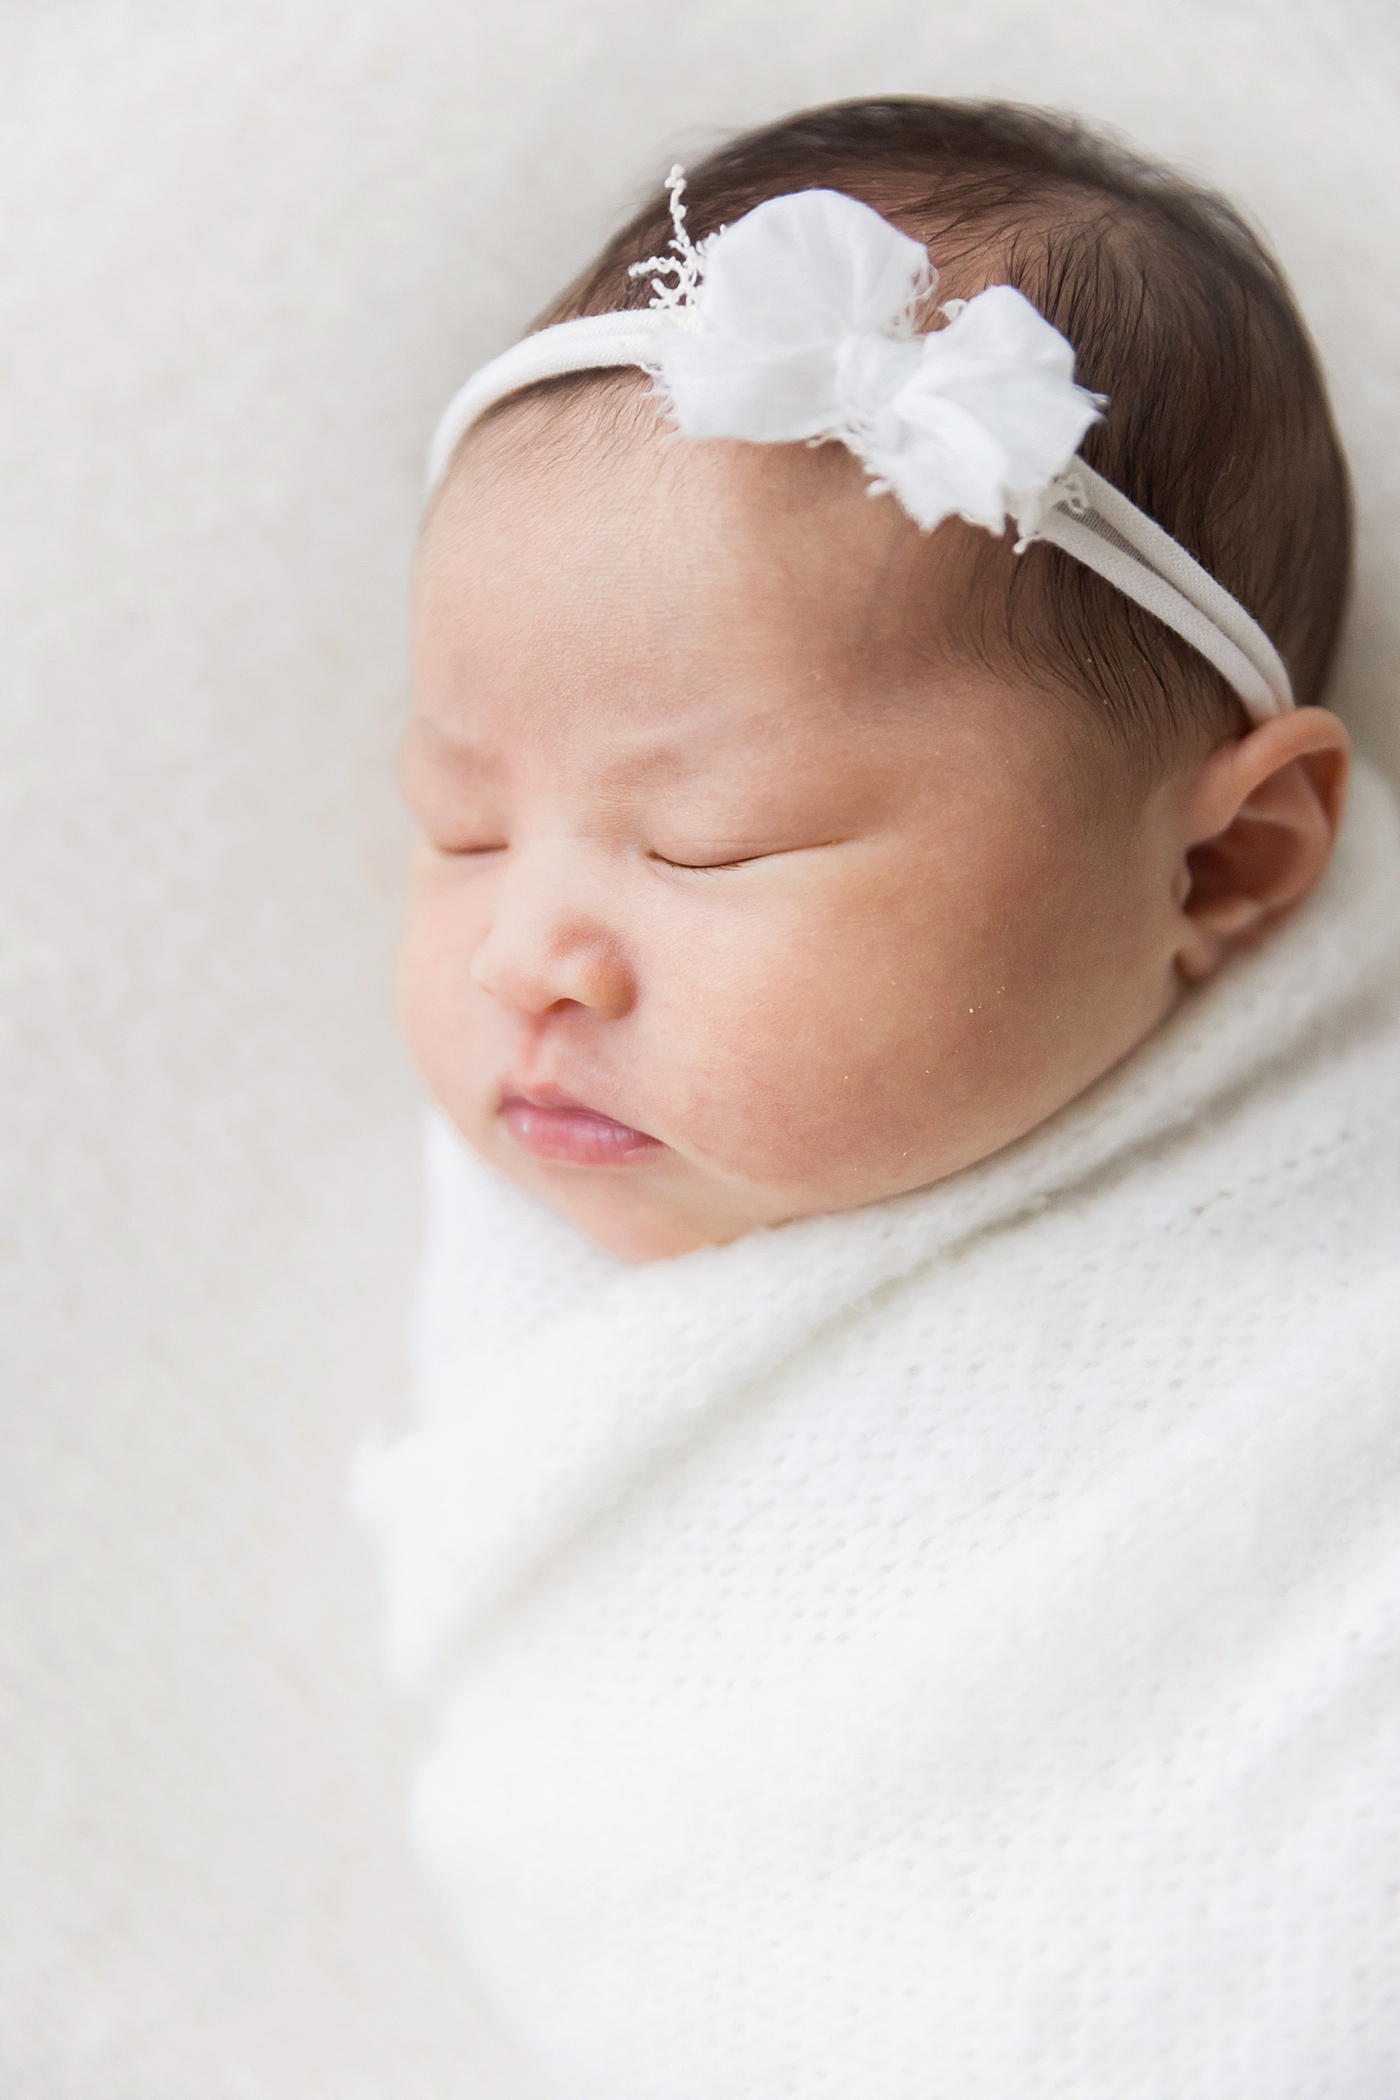 Newborn swaddled and sleeping for photos with Fresh Light Photography.